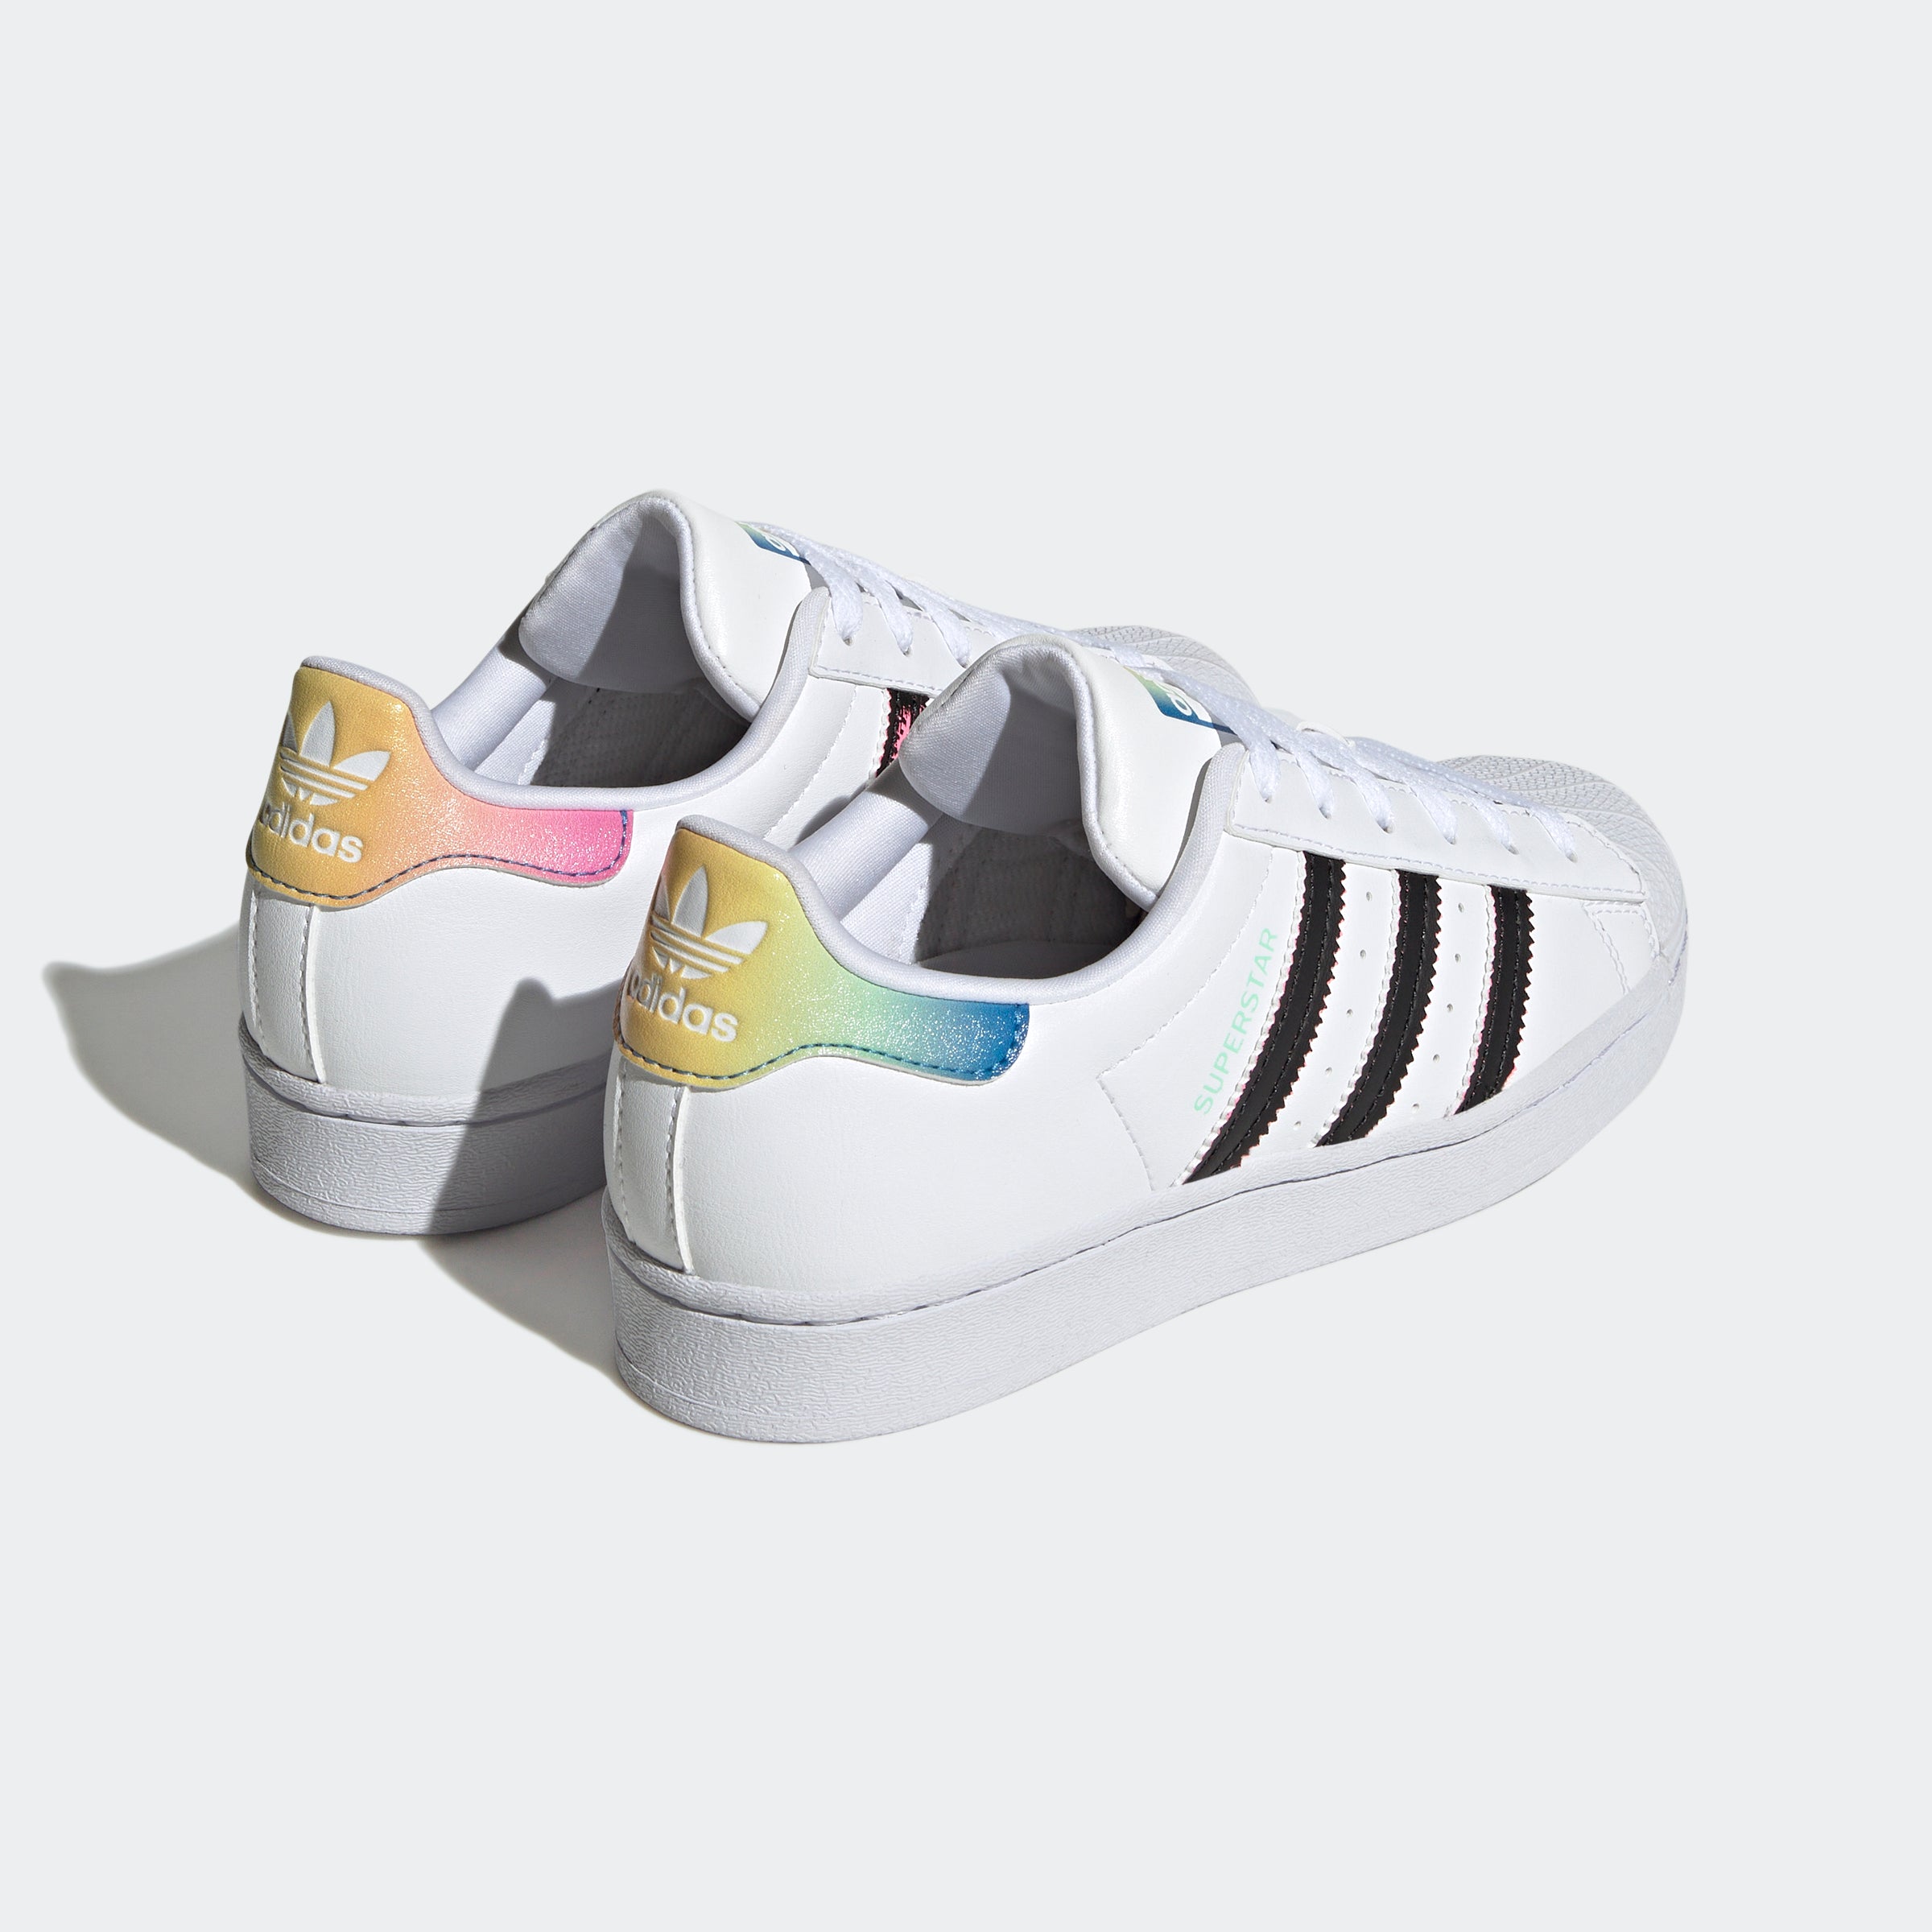 adidas traxion climacool boots black sale - Star Weekend With New Sneakers  and rose – Fonjep News - Adidas Celebrated WNBA All